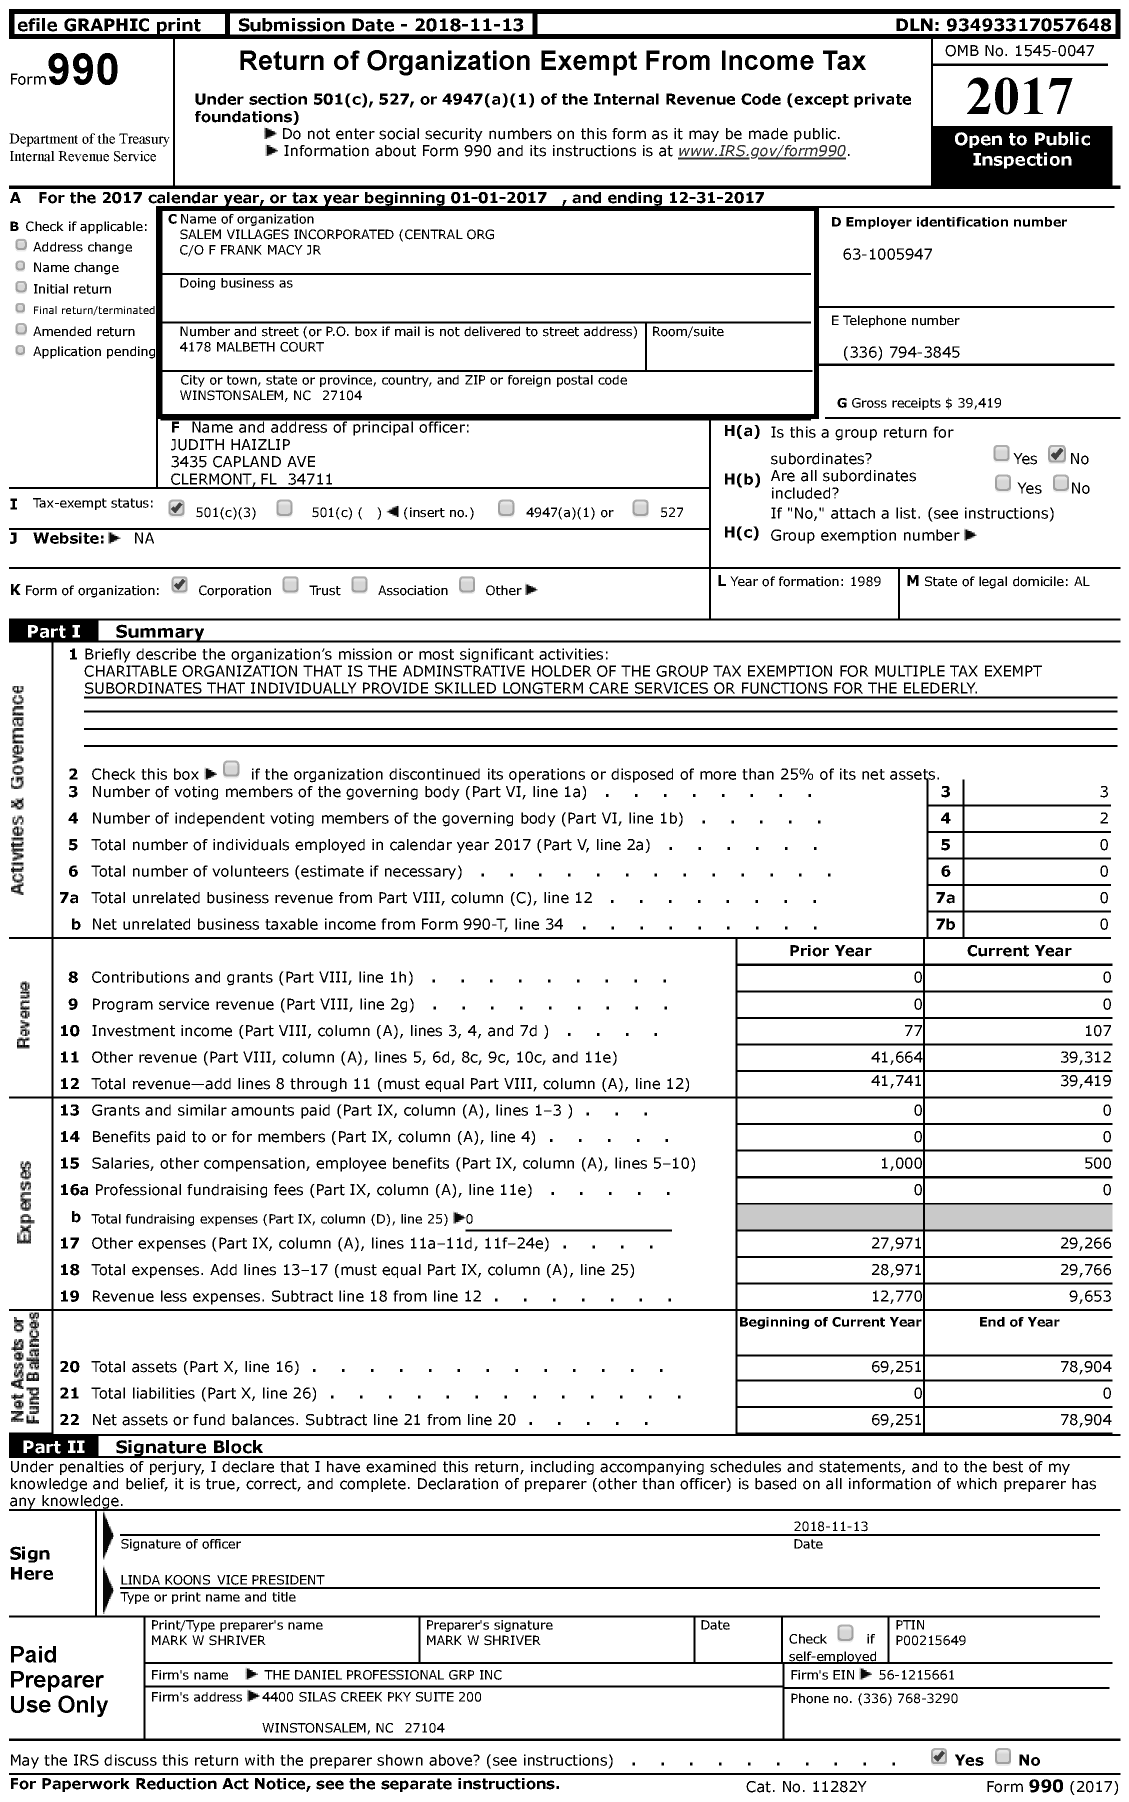 Image of first page of 2017 Form 990 for Salem Villages Incorporated (Central Org)